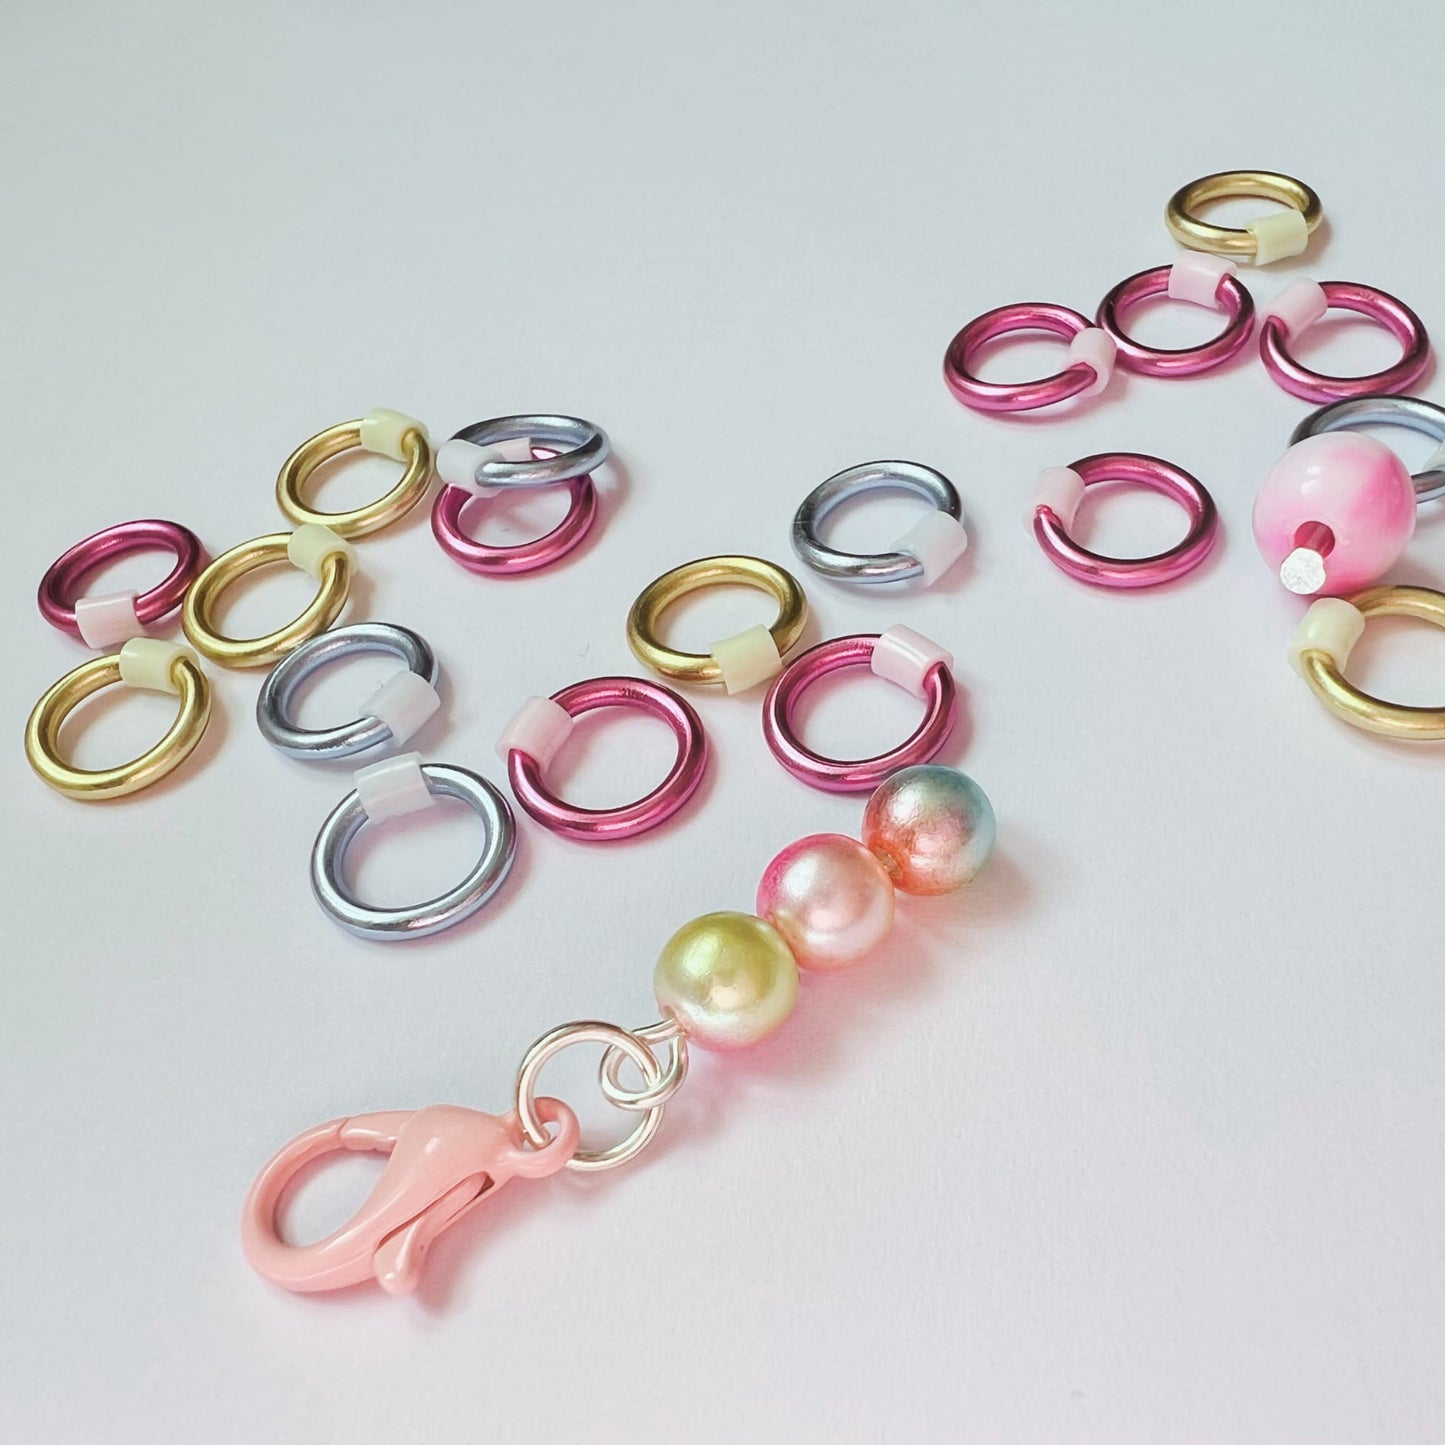 Pastel Ice Cream inspired Knitting Stitch Markers for Sock, Lace & Knitting - Snag Free in 3 Sizes